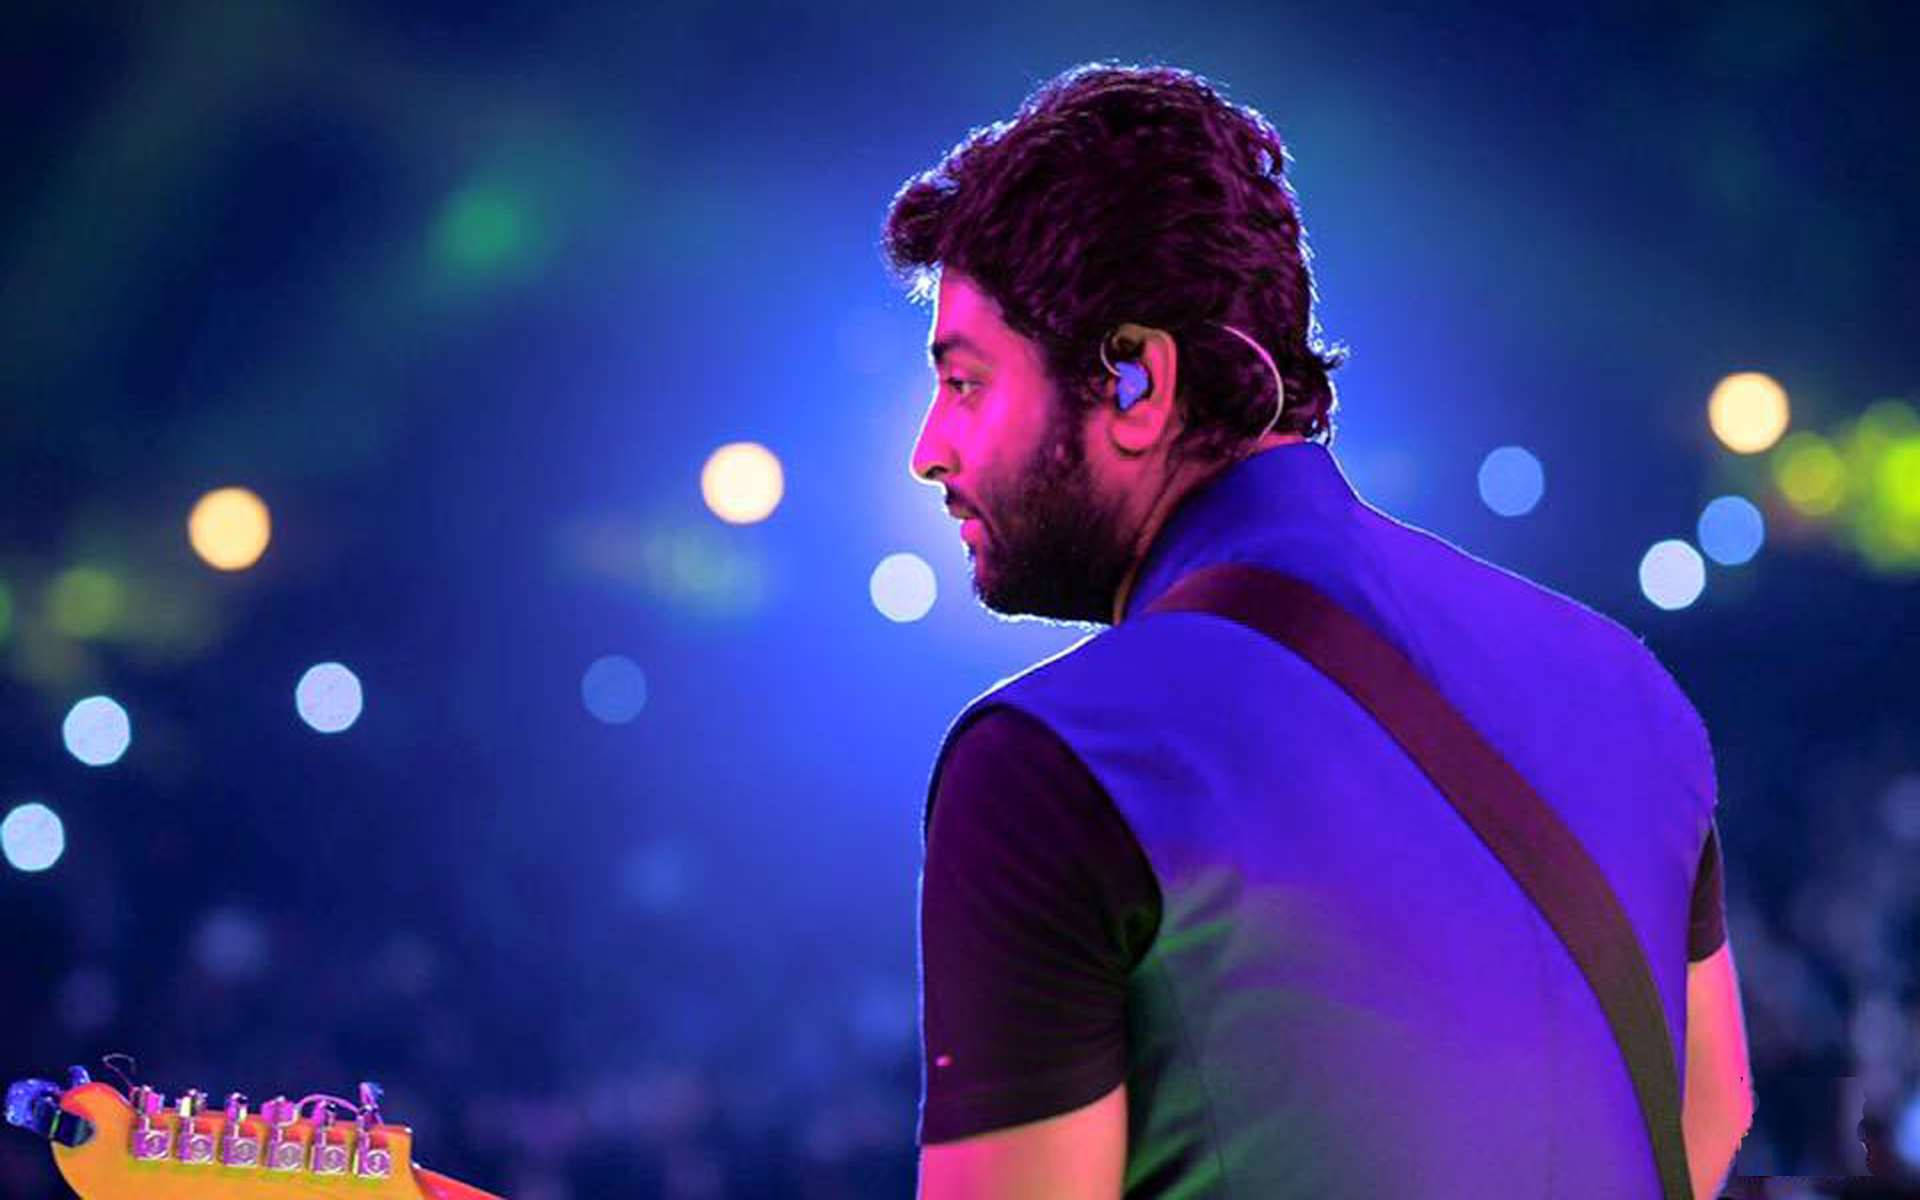 Arijit Singh Indian Singer Guitar Performance On Stage Picture